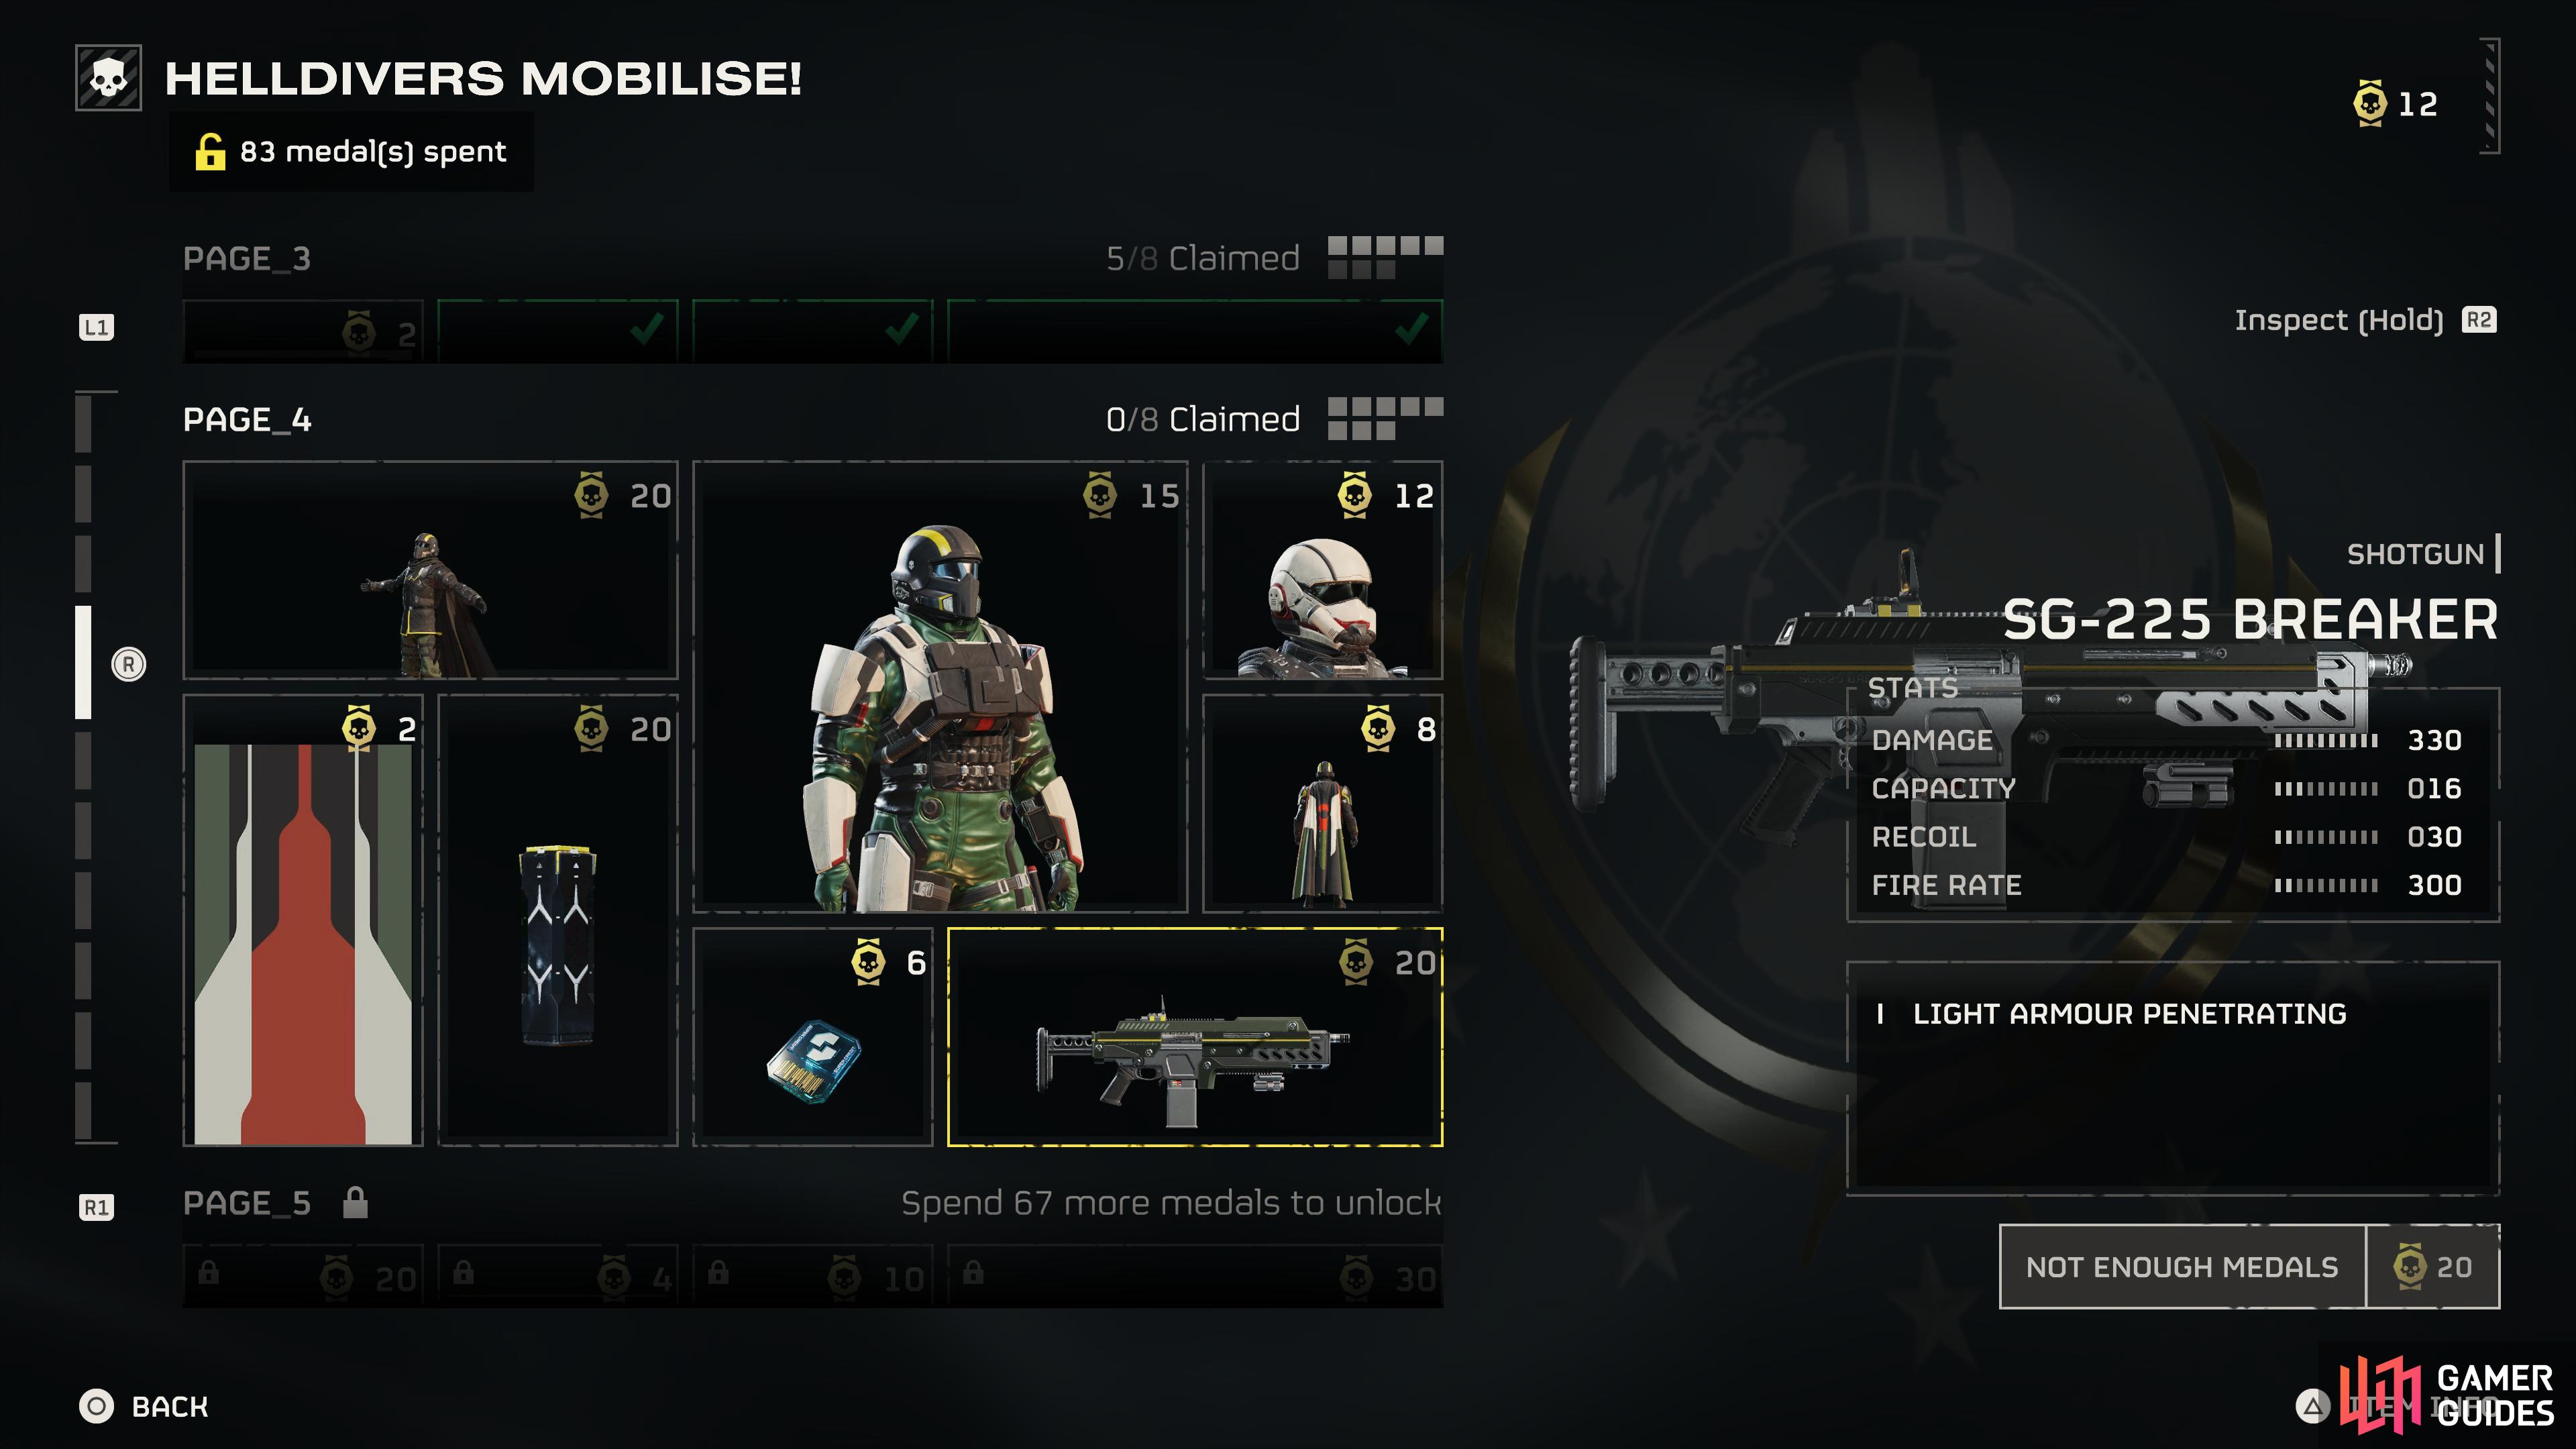 The SG 225 Breaker can be found in the Helldivers Mobilise Store.